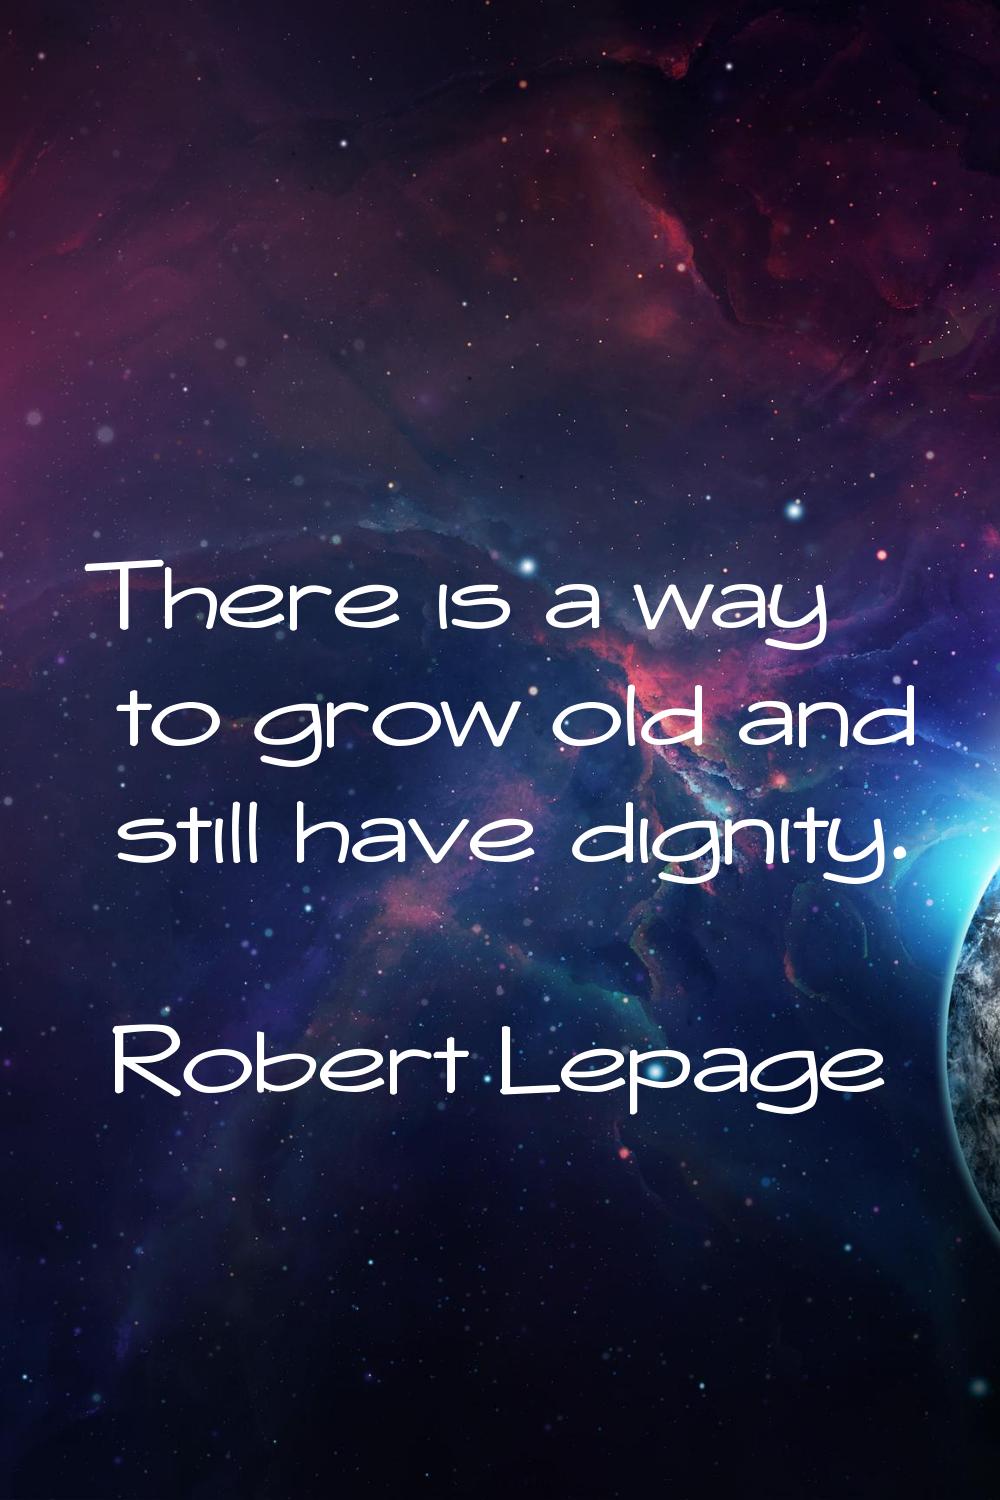 There is a way to grow old and still have dignity.